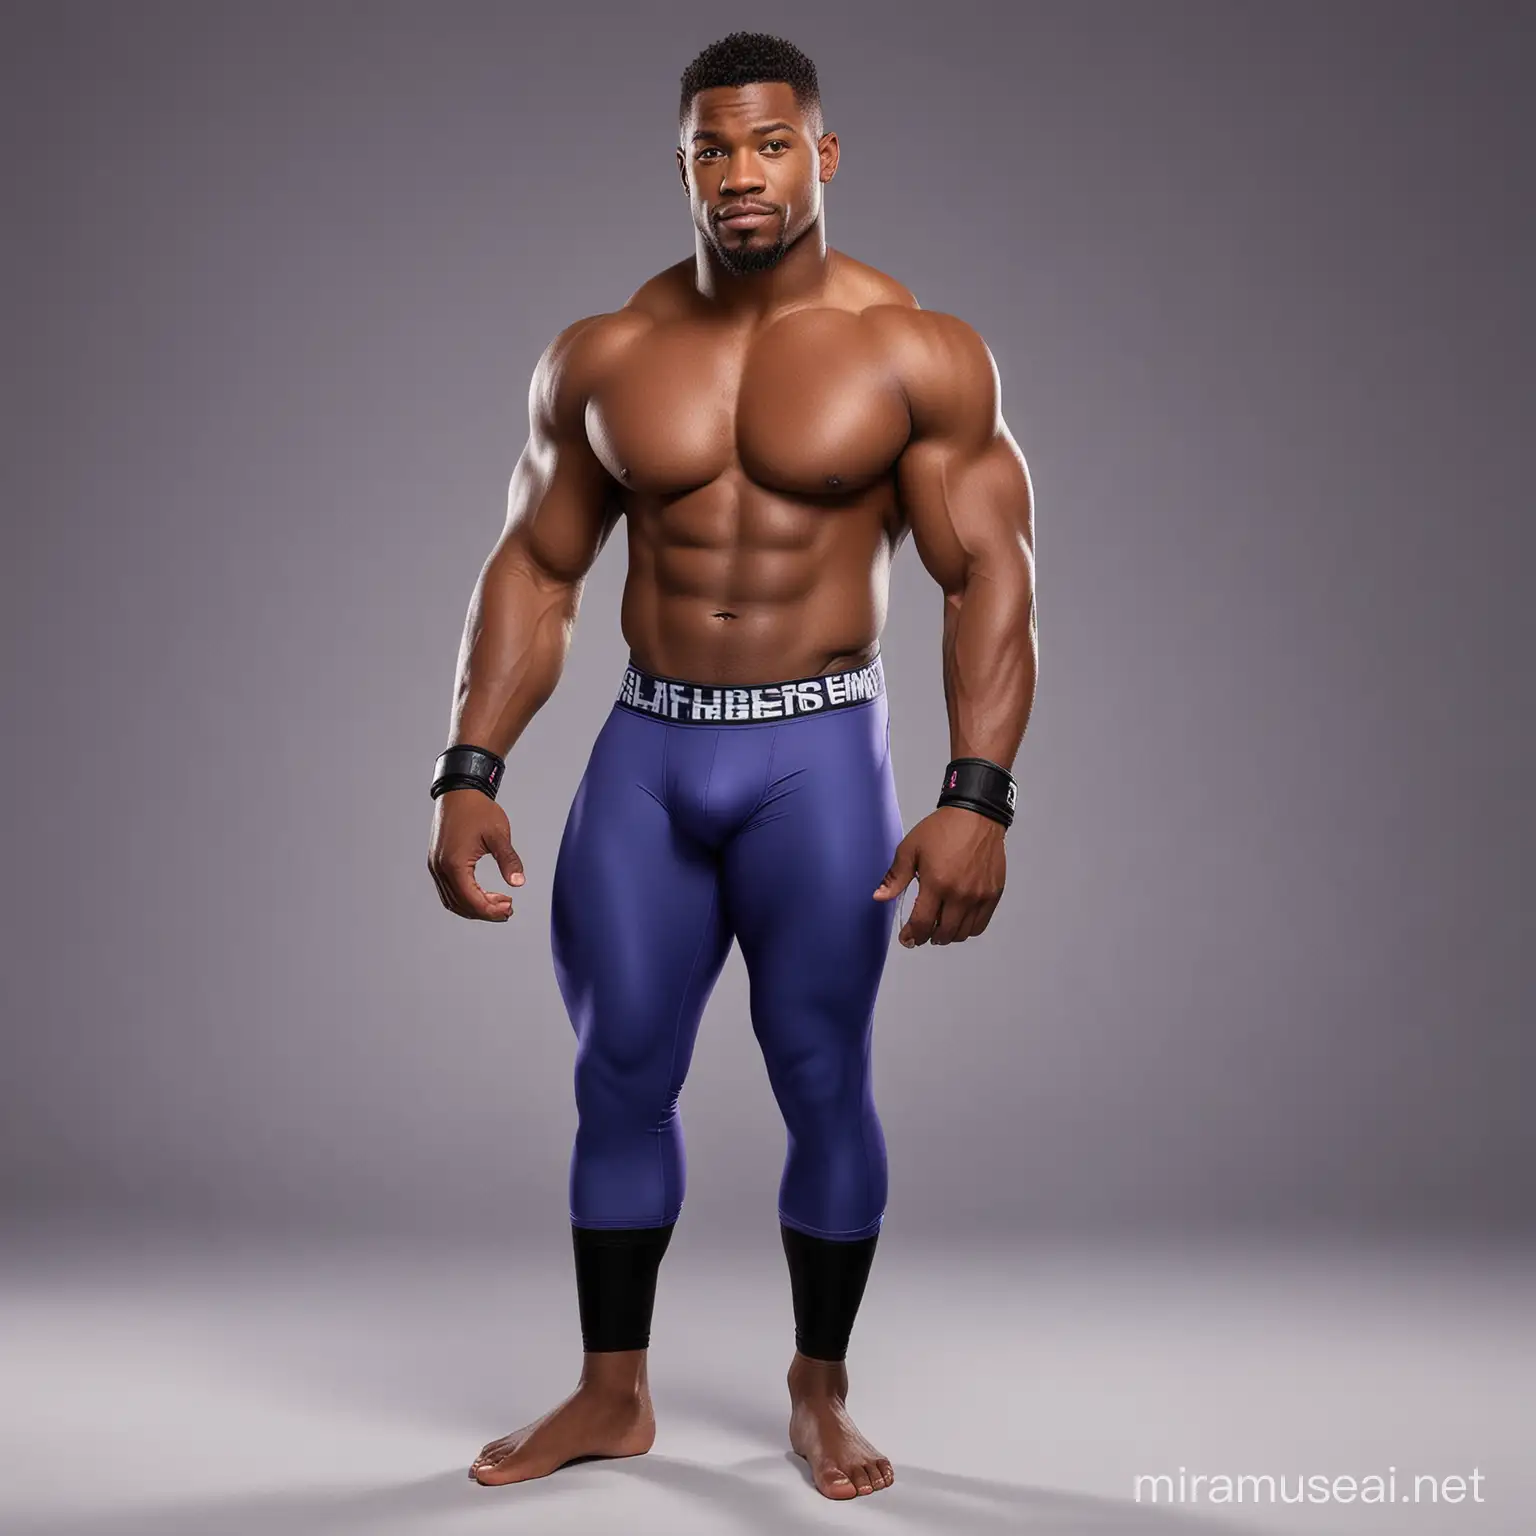 Charming muscular shirtless 30 year old male African American wrestler (reminiscent of Jax Briggs), with brown eyes, wearing long cobalt blue (leaning to purple) and black spandex leggings, plus some wristbands, well defined biceps and chest, in cartoon network style.